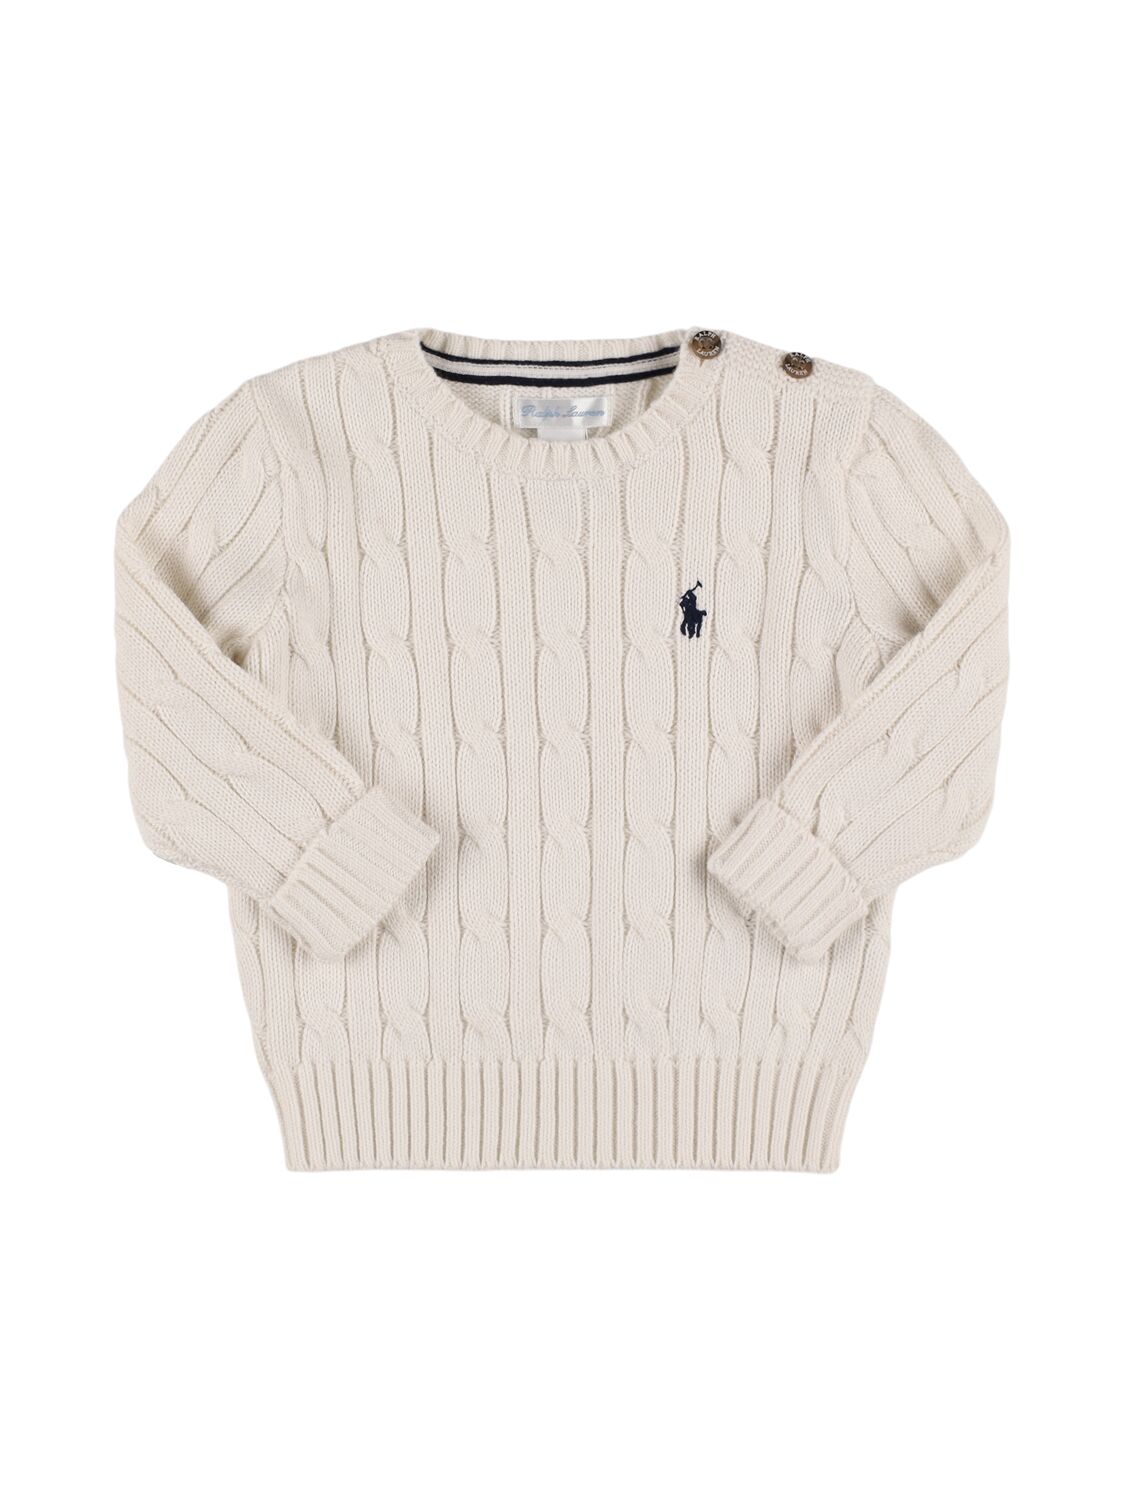 Image of Cotton Knit Sweater